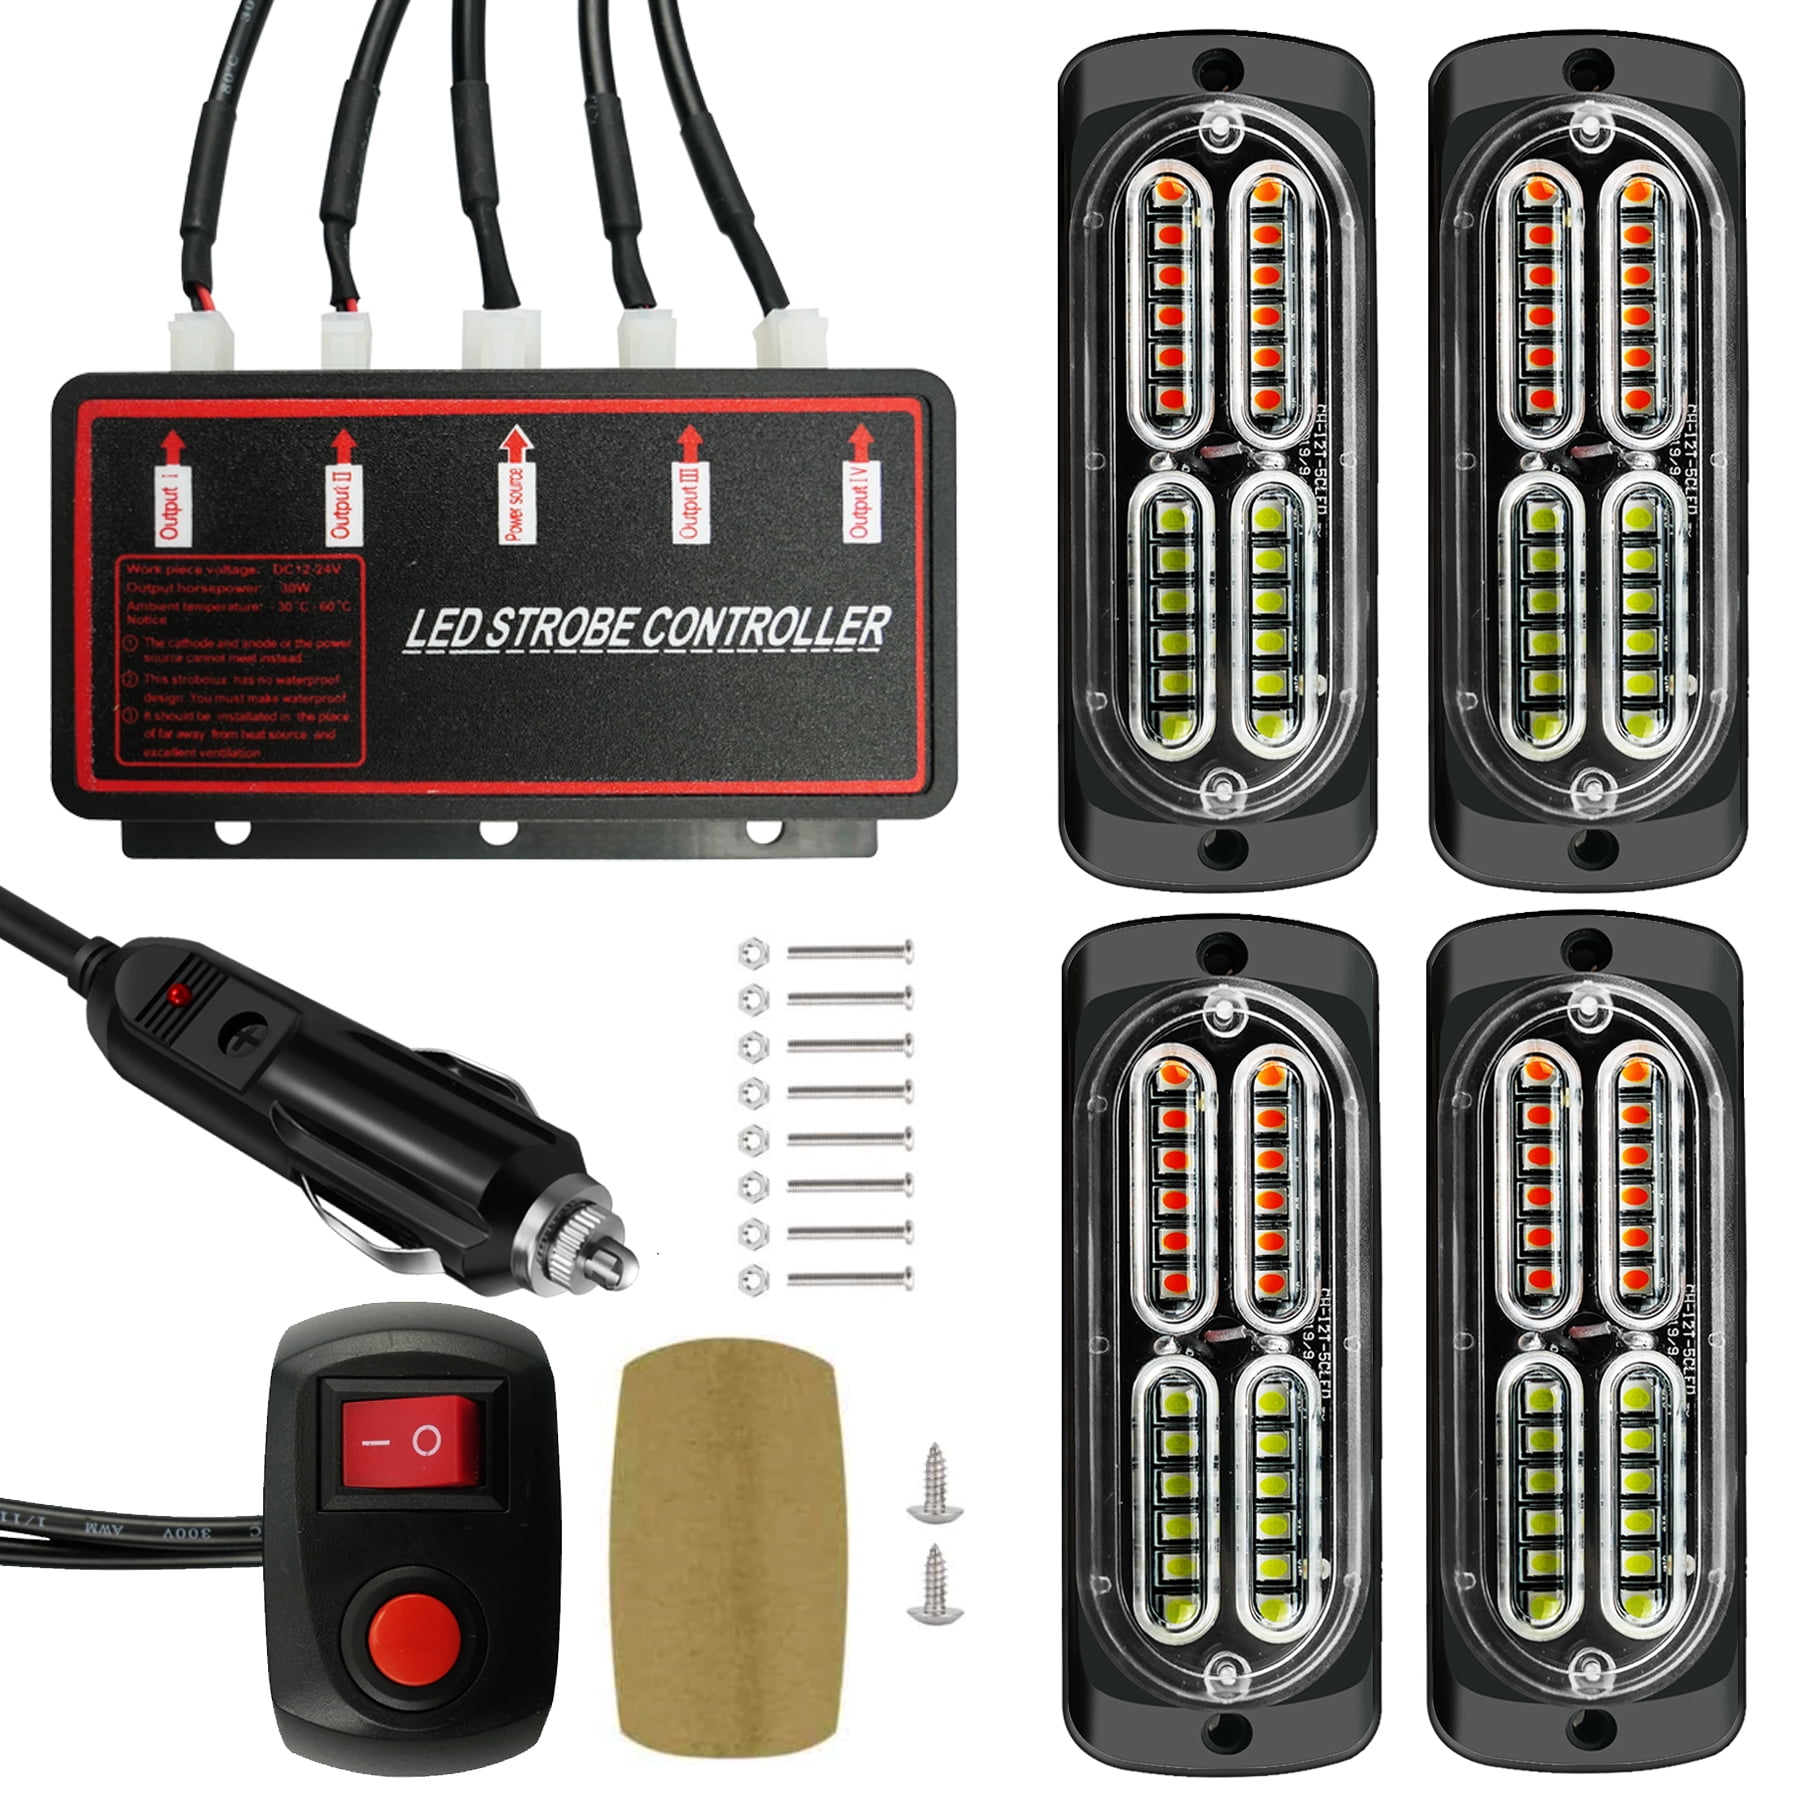 8X 2 LED Amber Light Grill Construction Utility Flash Hazard 12V with Controller 